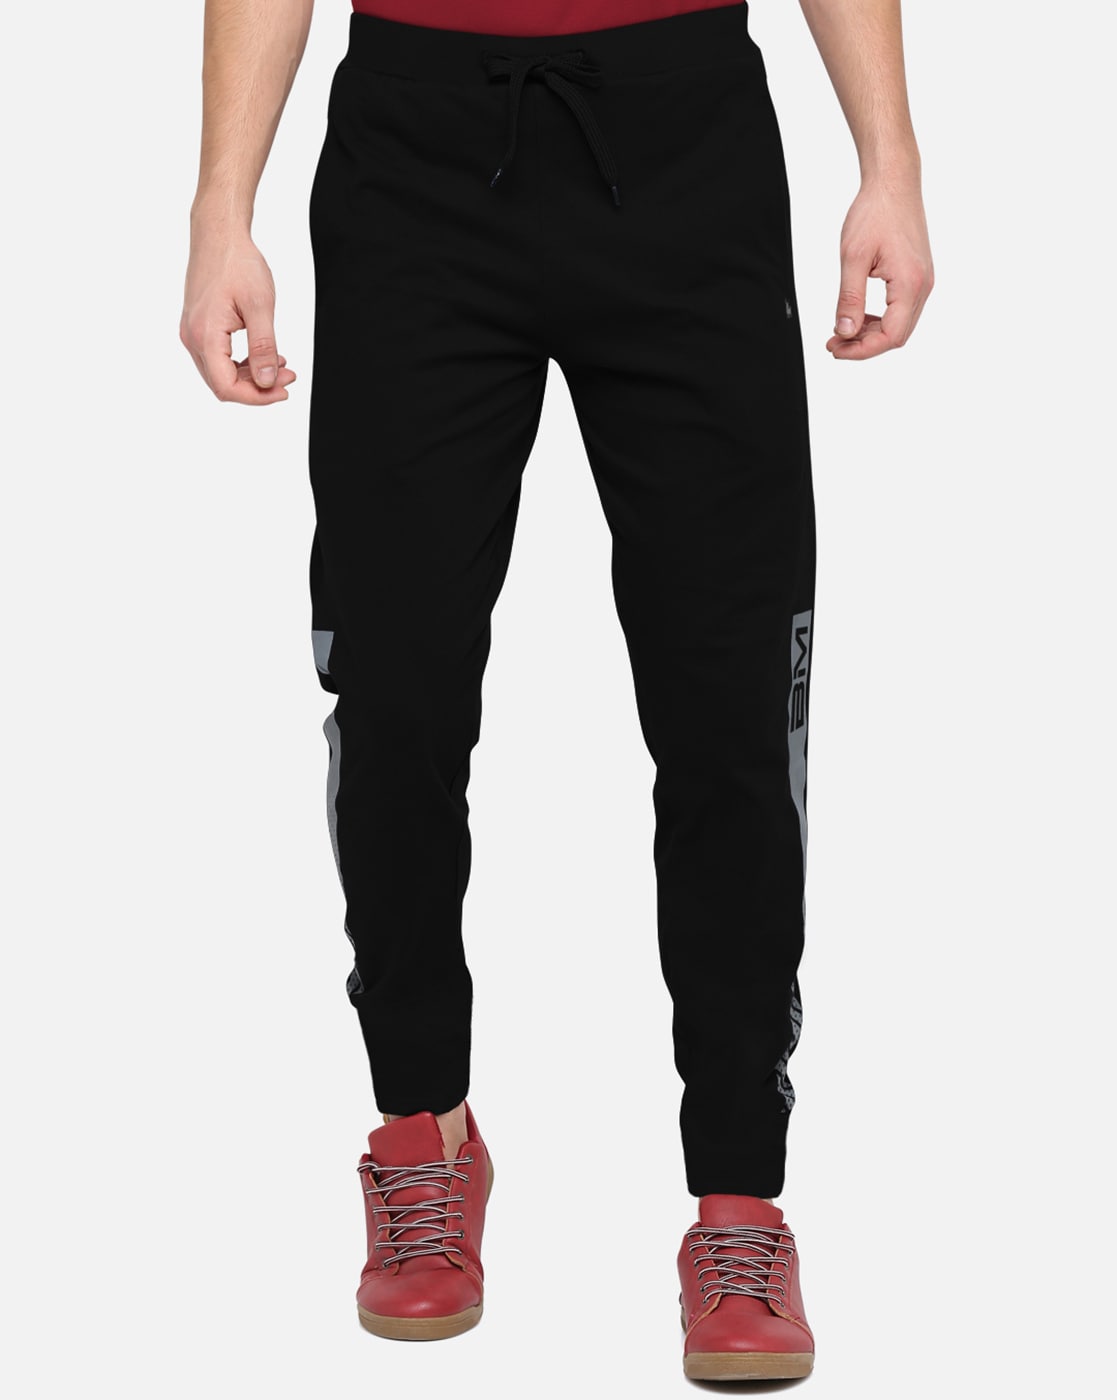 Diaz Cotton Trackpants - Multi Color - Buy Diaz Cotton Trackpants - Multi  Color Online at Best Prices in India on Snapdeal